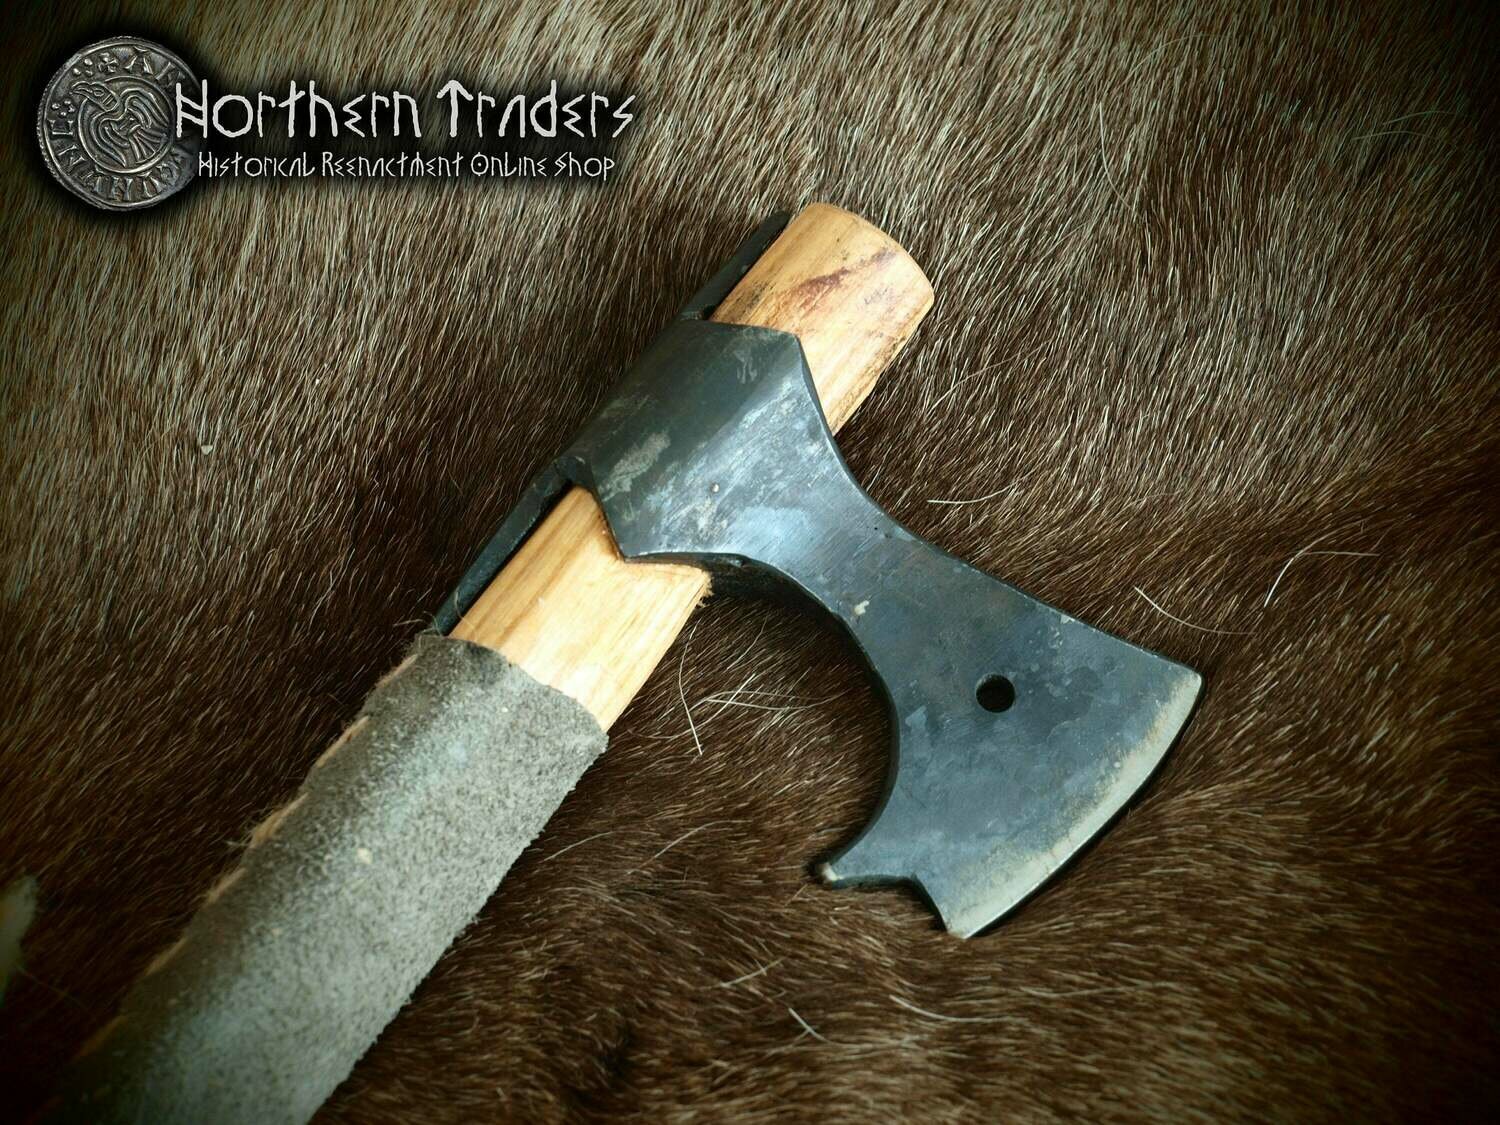 Axe from Gotland